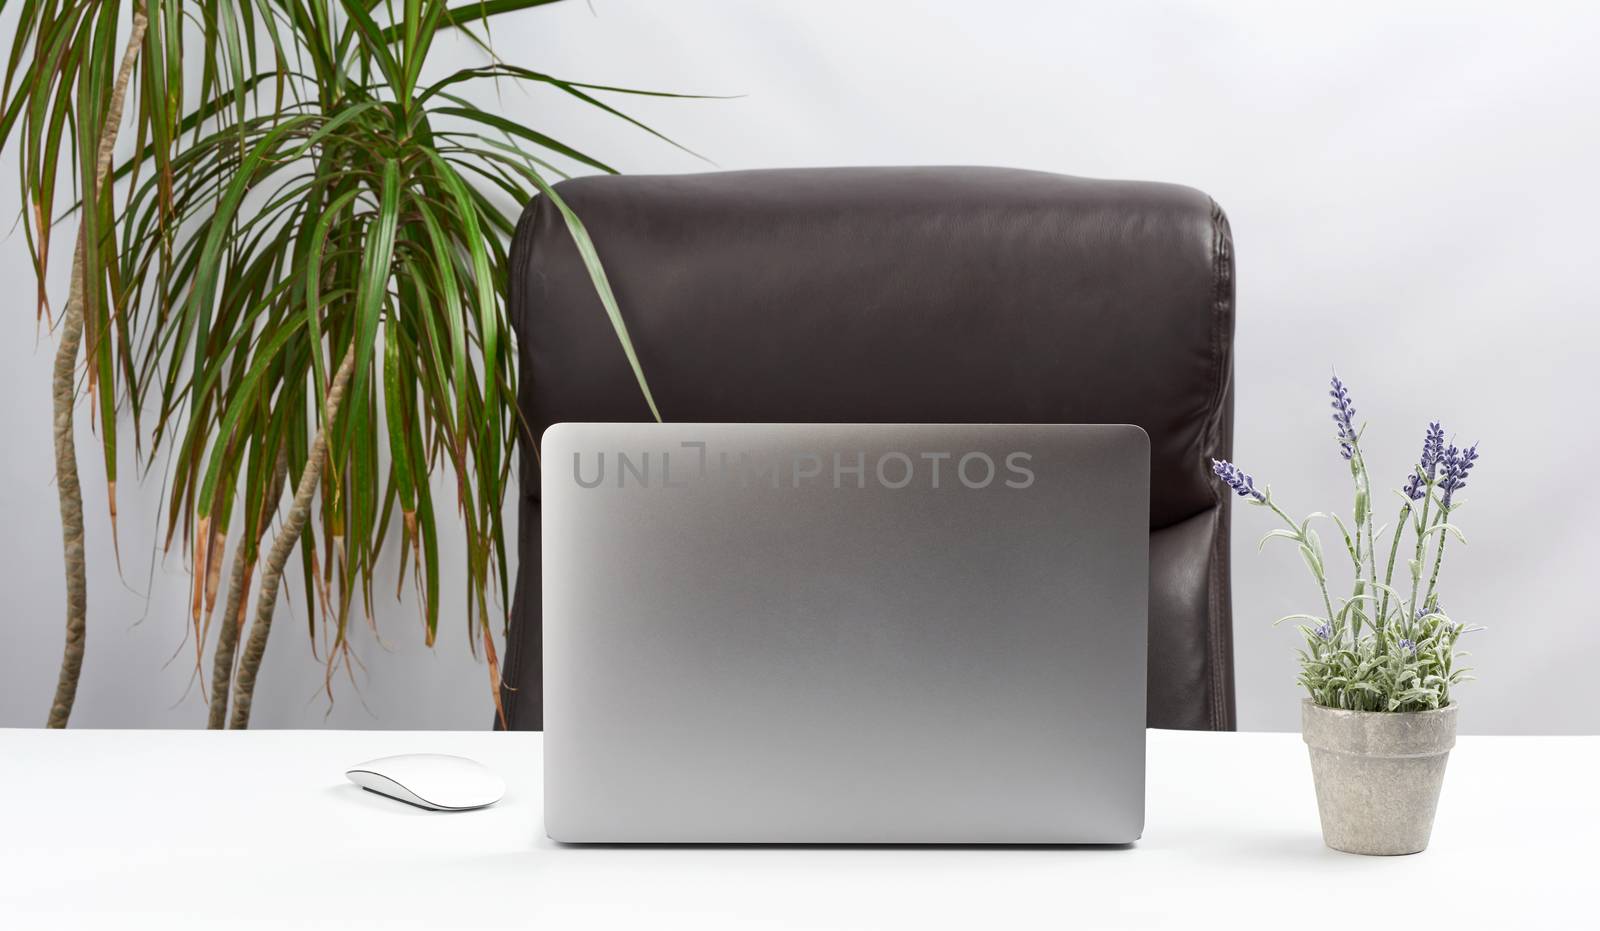 An open gray laptop is standing on a white table, next to a wireless mouse, the workplace of a freelancer, a businessman. near the white wall there is a pot with a large plant